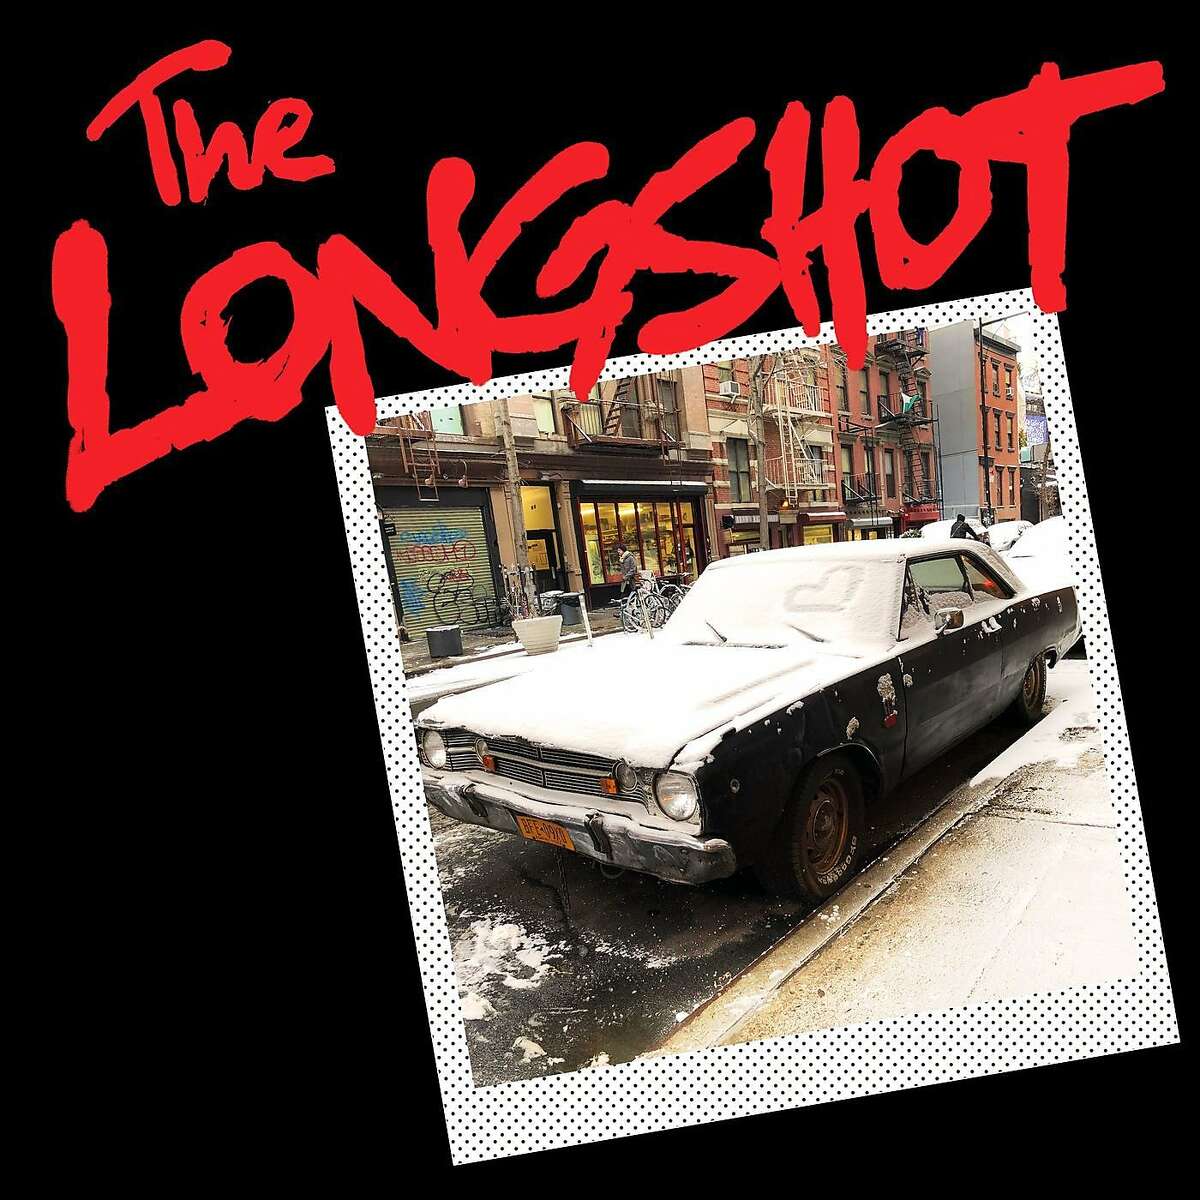 Green Day's Billie Joe Armstrong is the Longshot